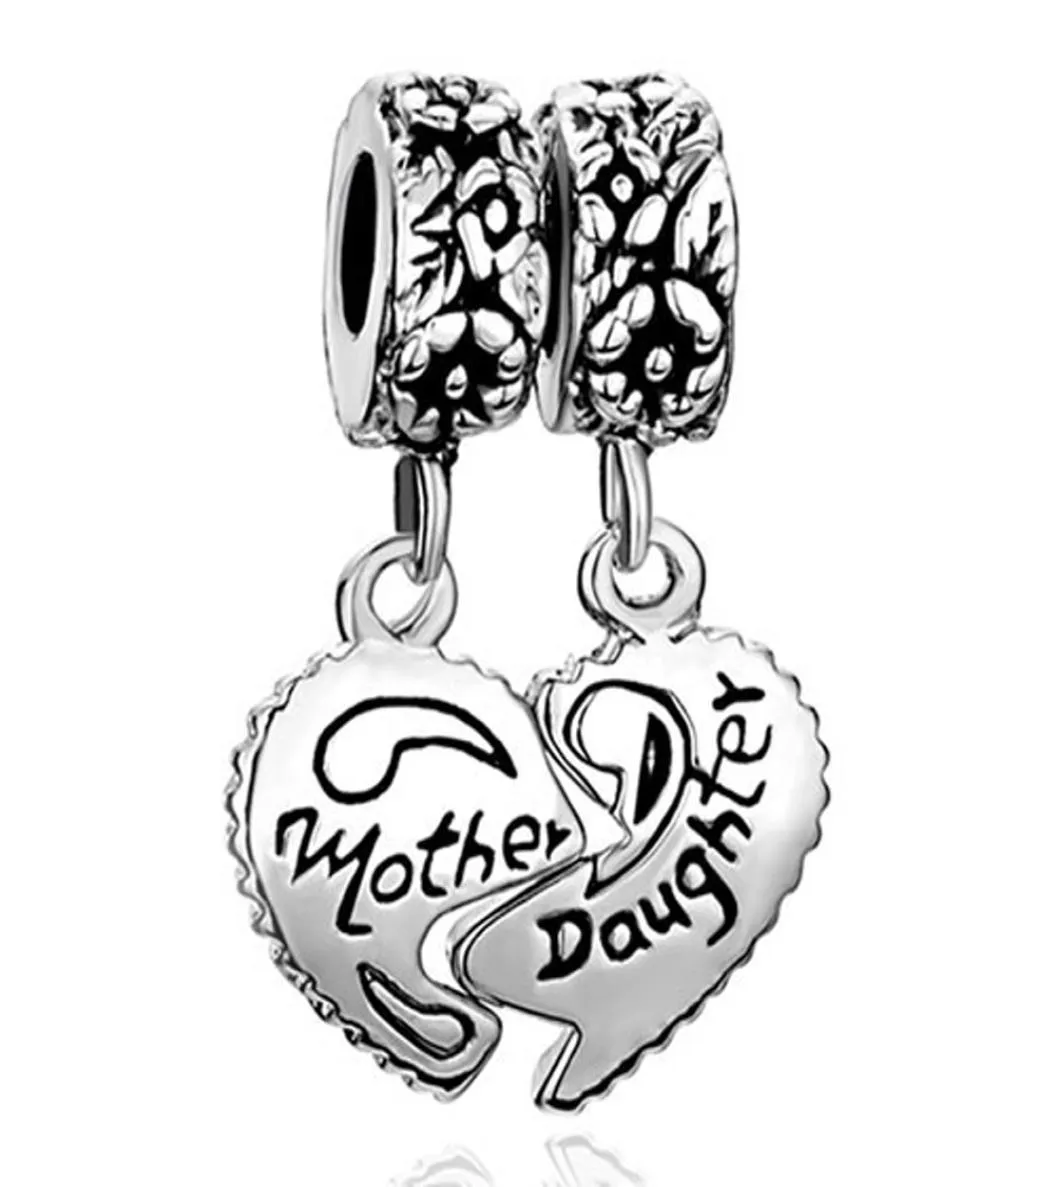 Valentines Day jewelry metal mother daughter heart set drop European style dangle bead infant lucky charms Fits charm bracelet6472768